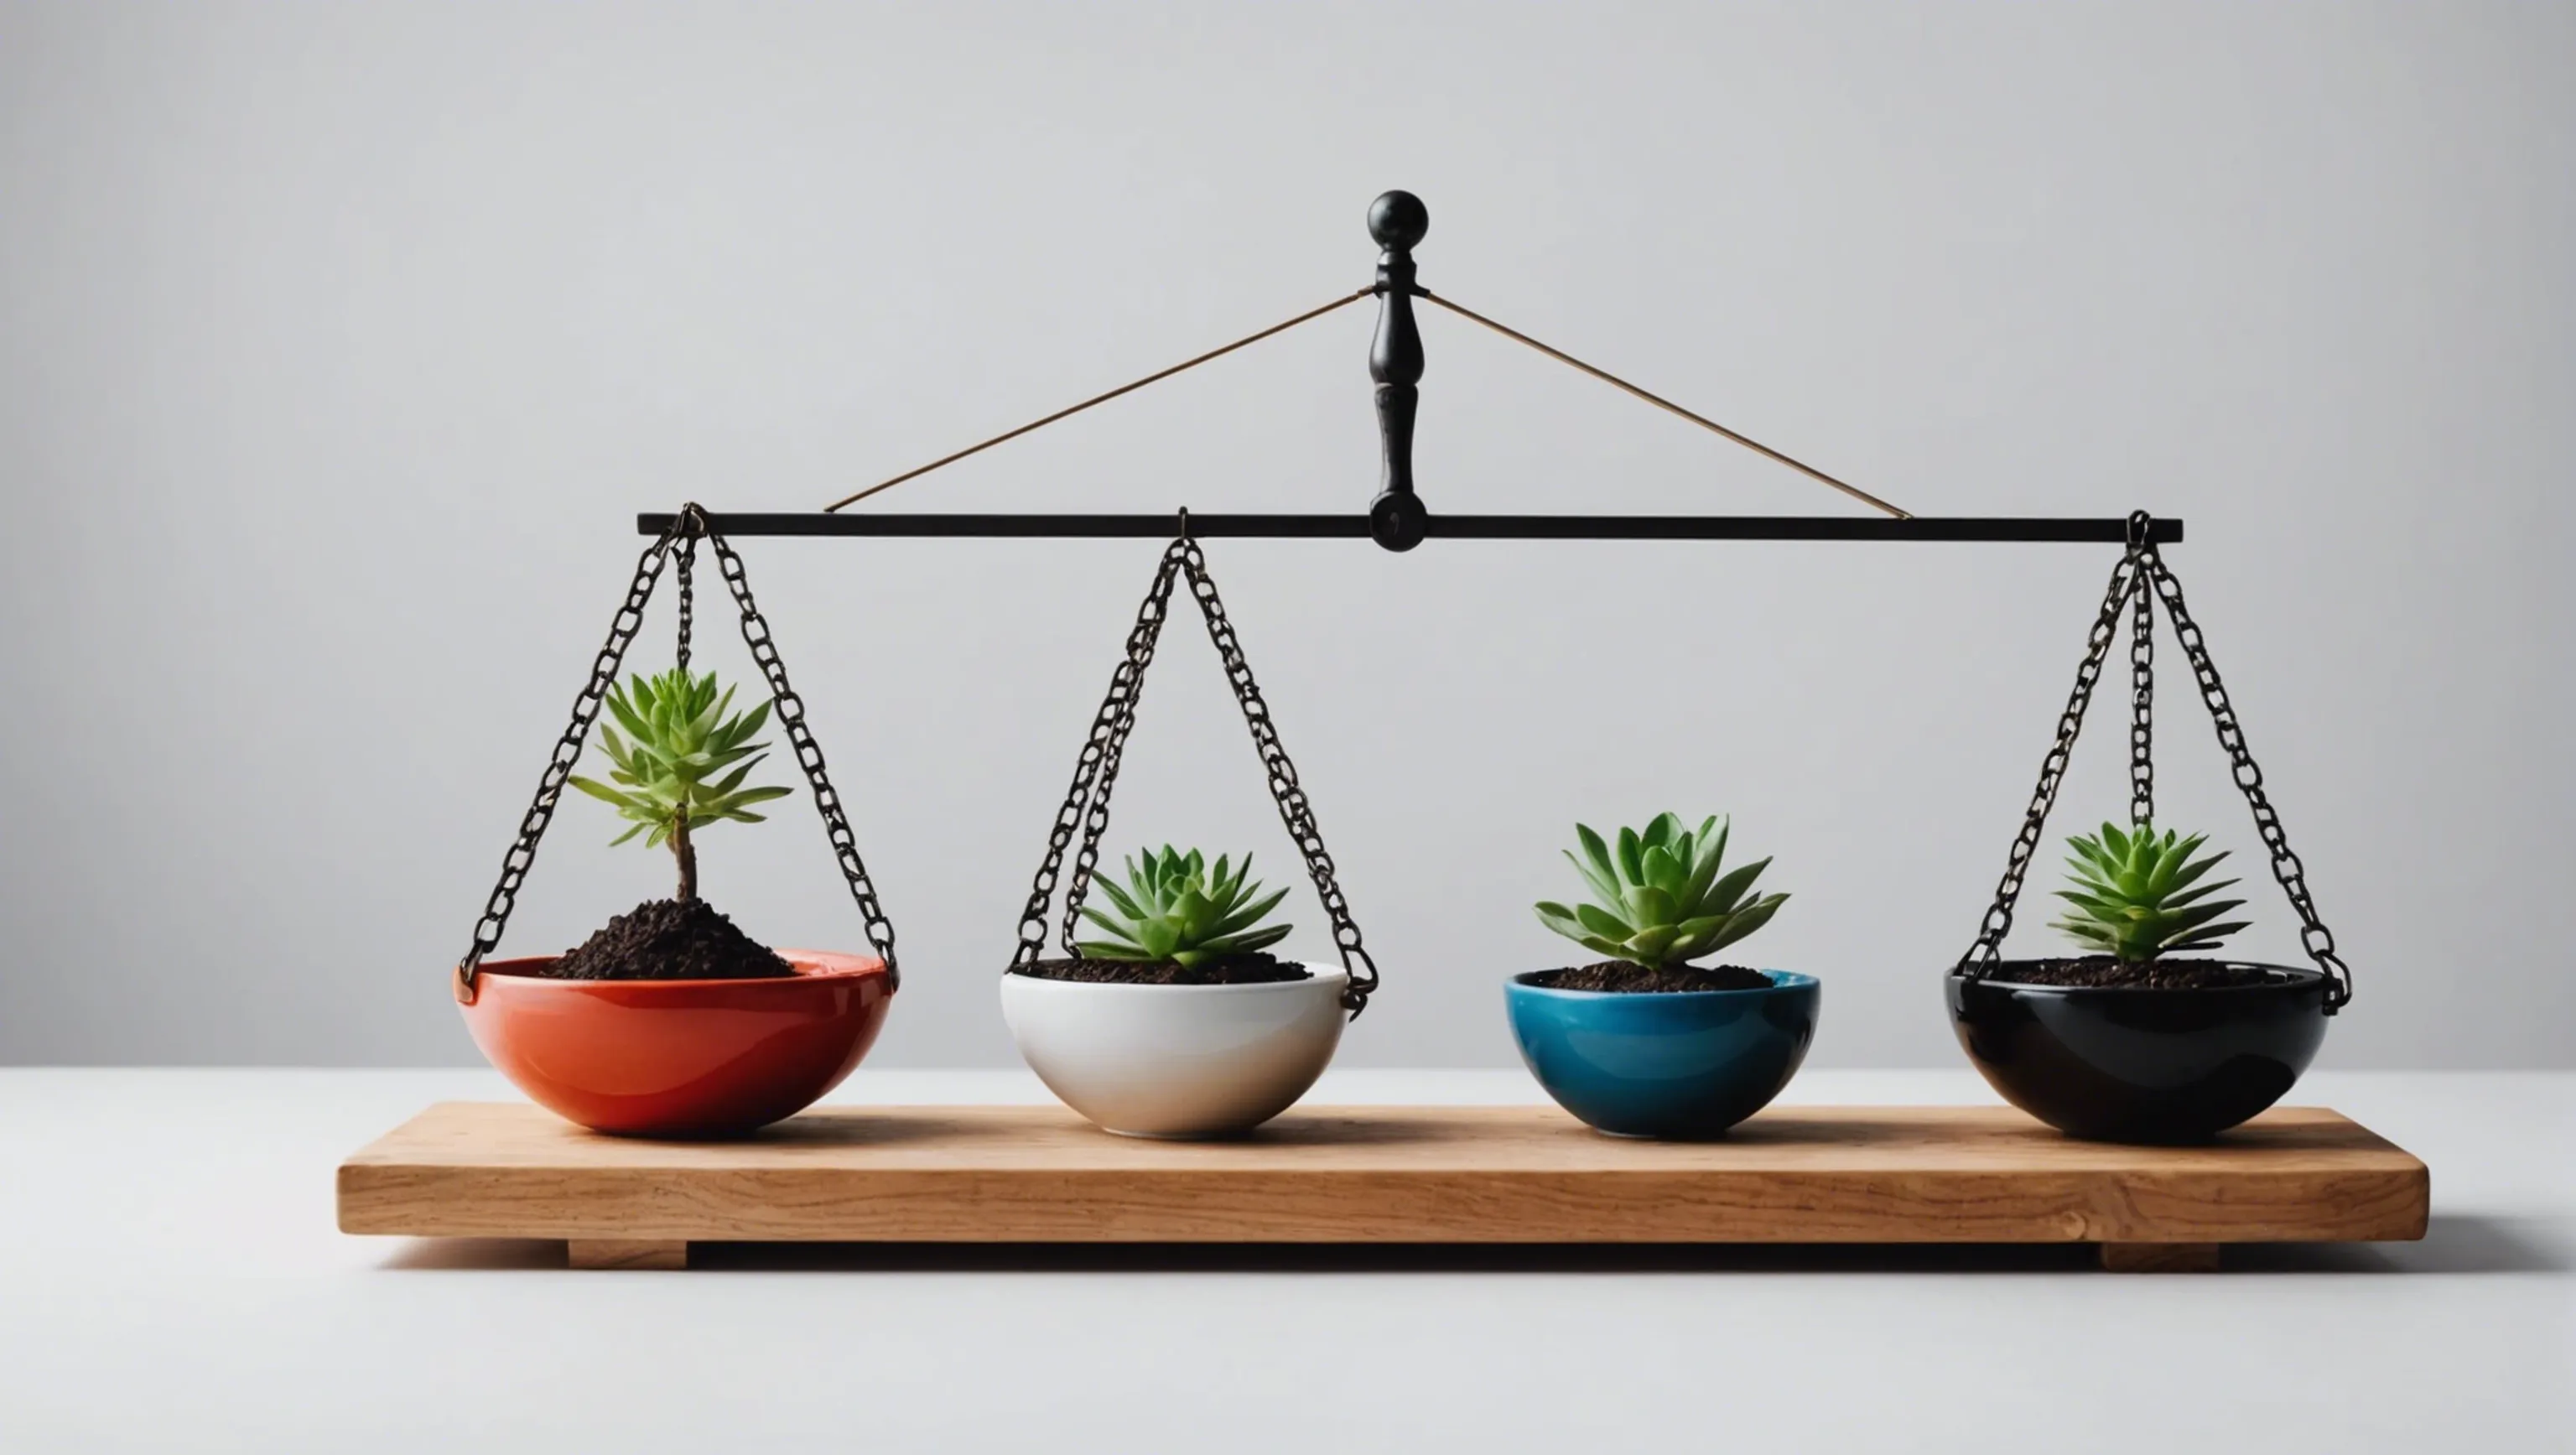 Finding the right balance between quality and quantity in content marketing